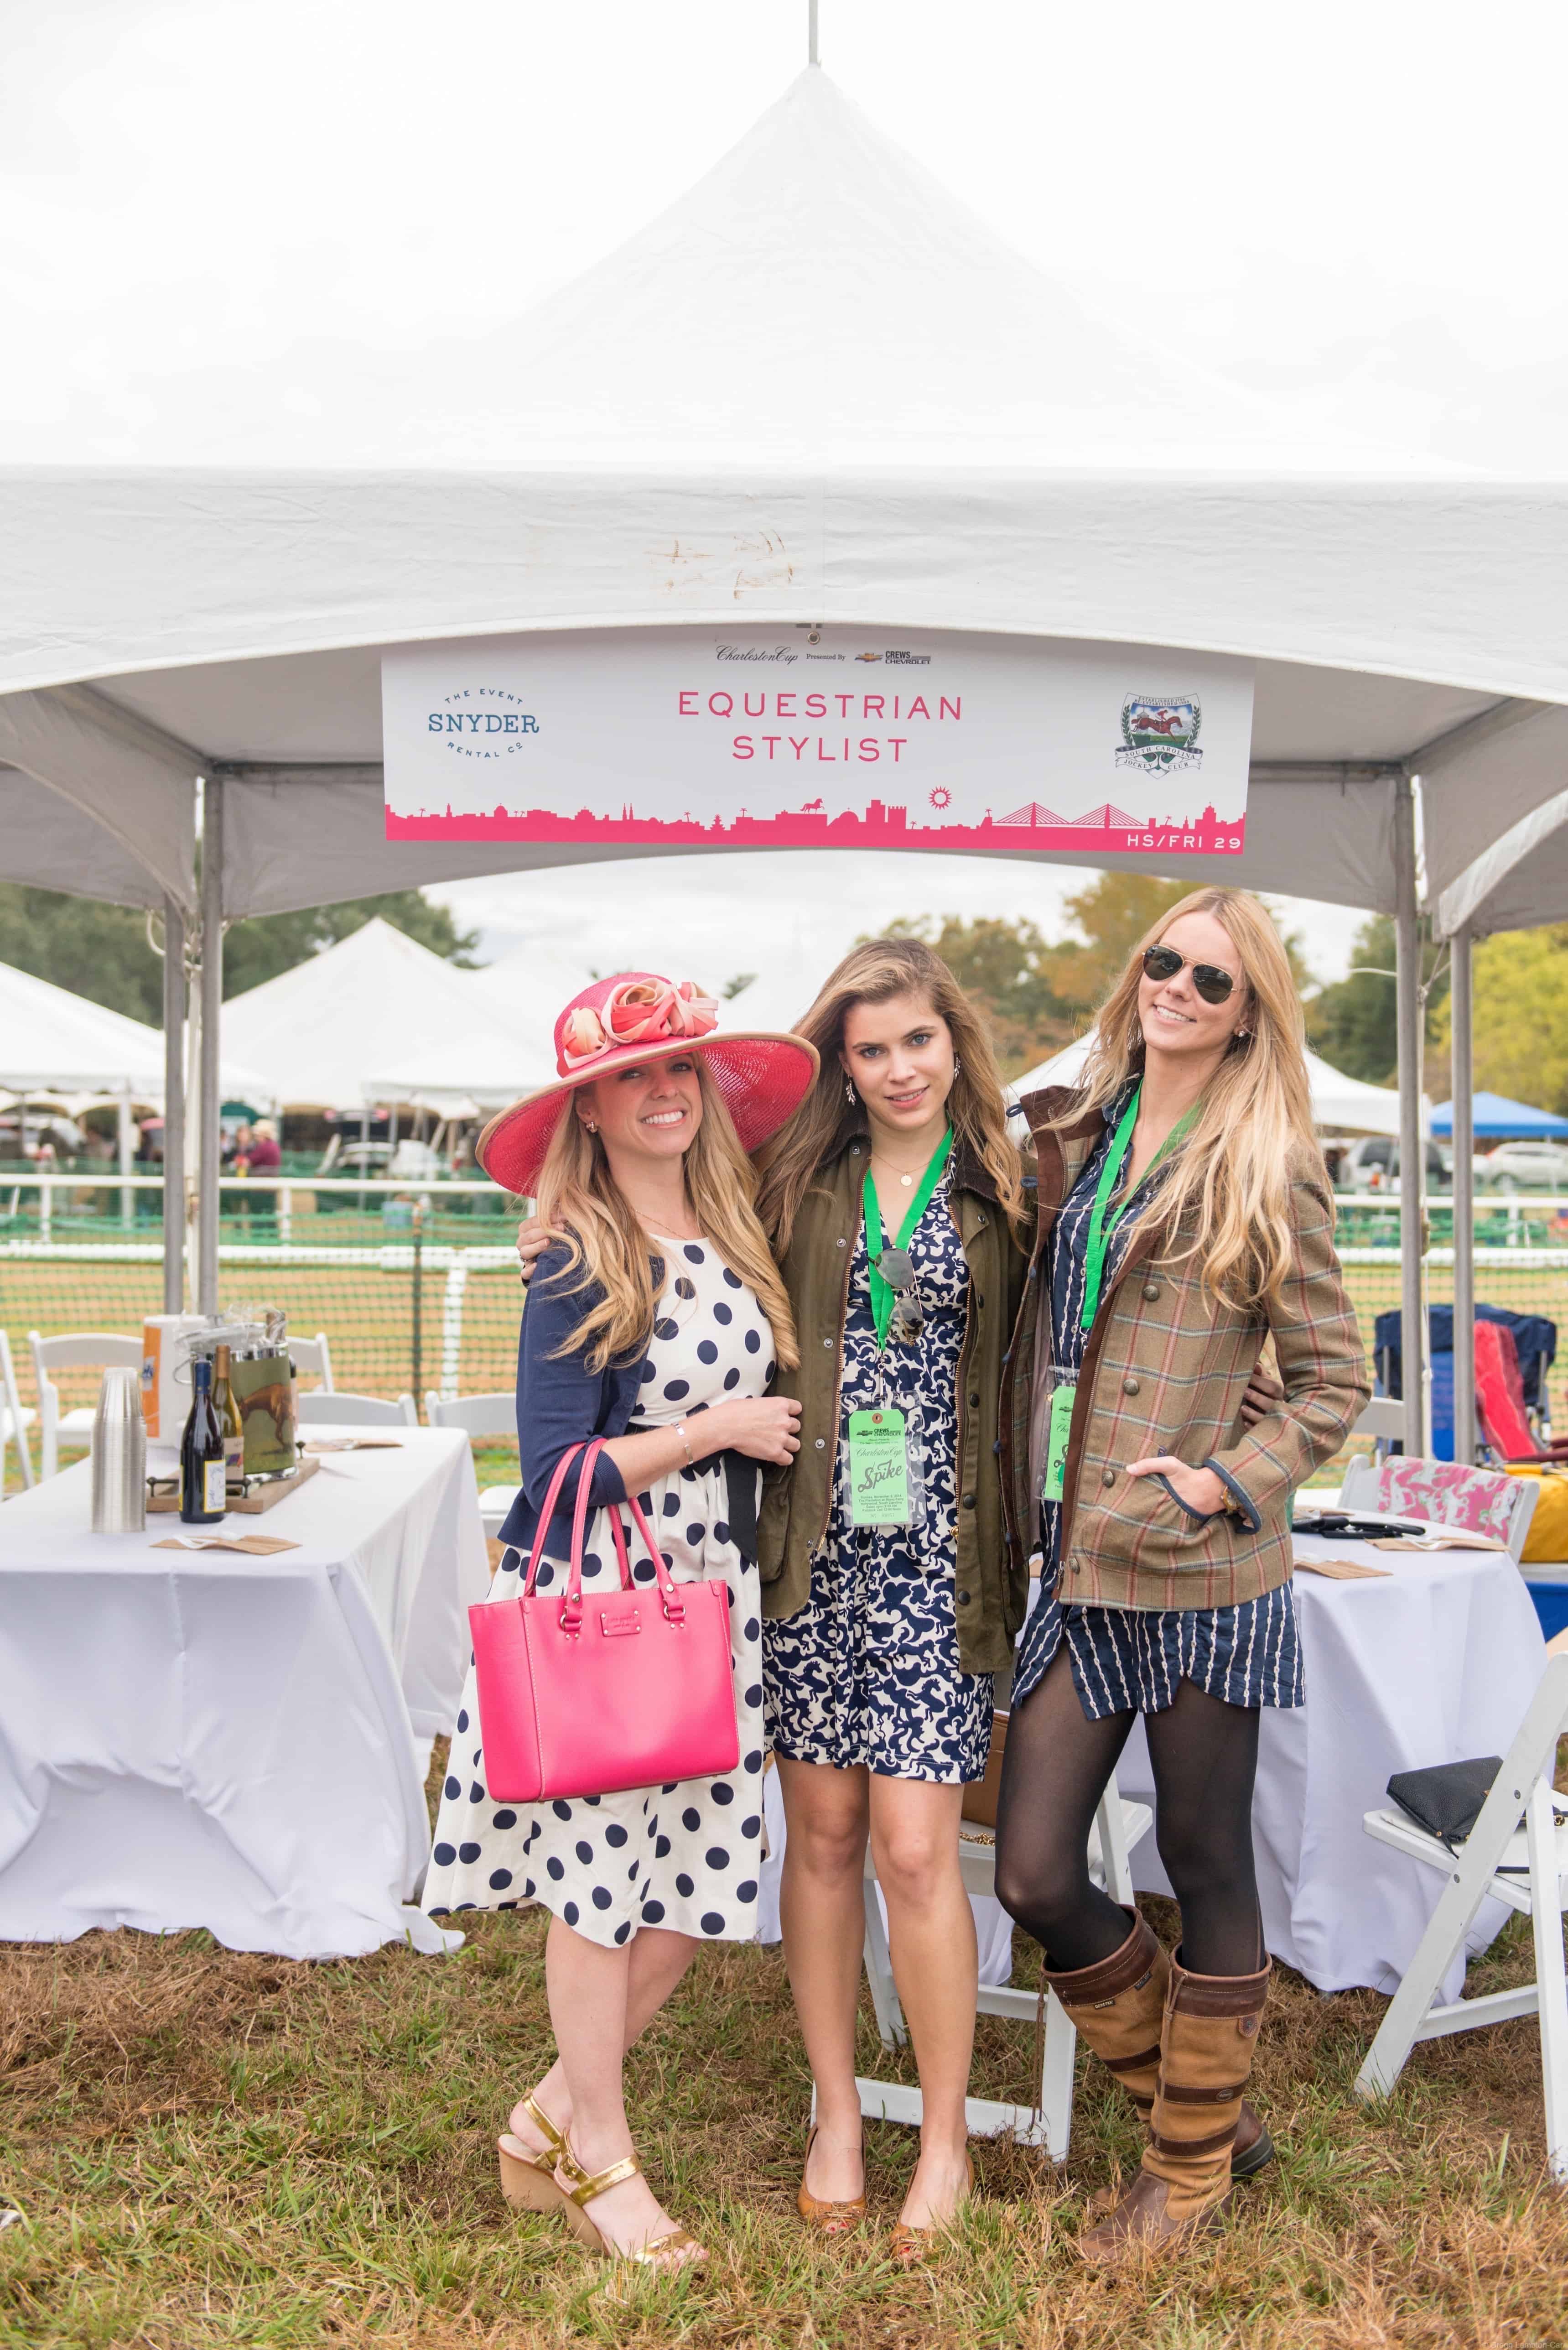 Scenes from the 2014 Charleston Cup